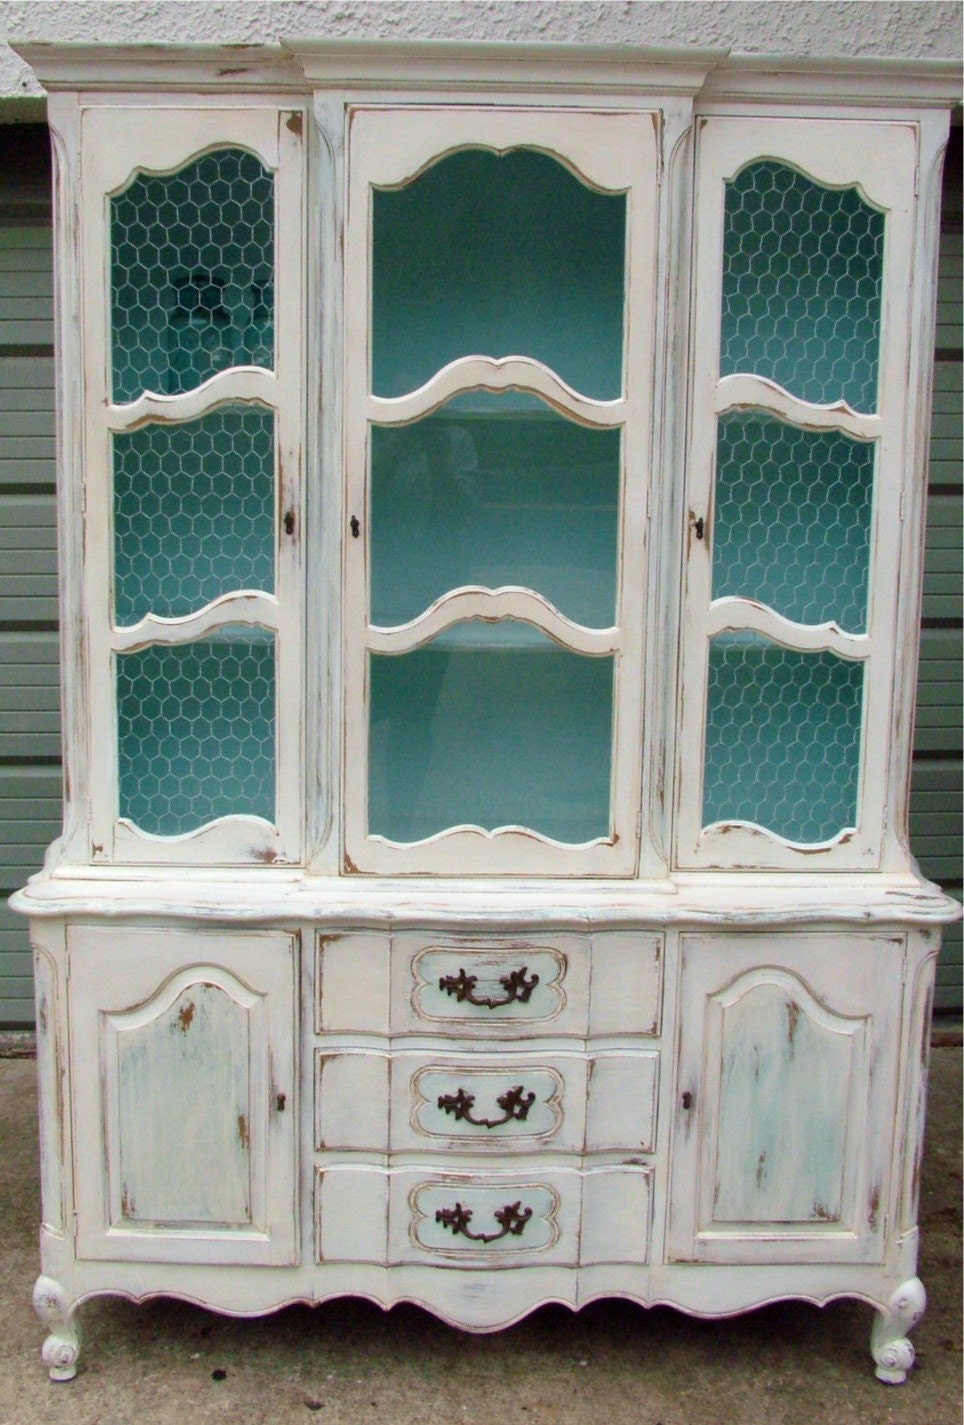 MOVING SALE Shabby Chic Vintage French Country Hutch